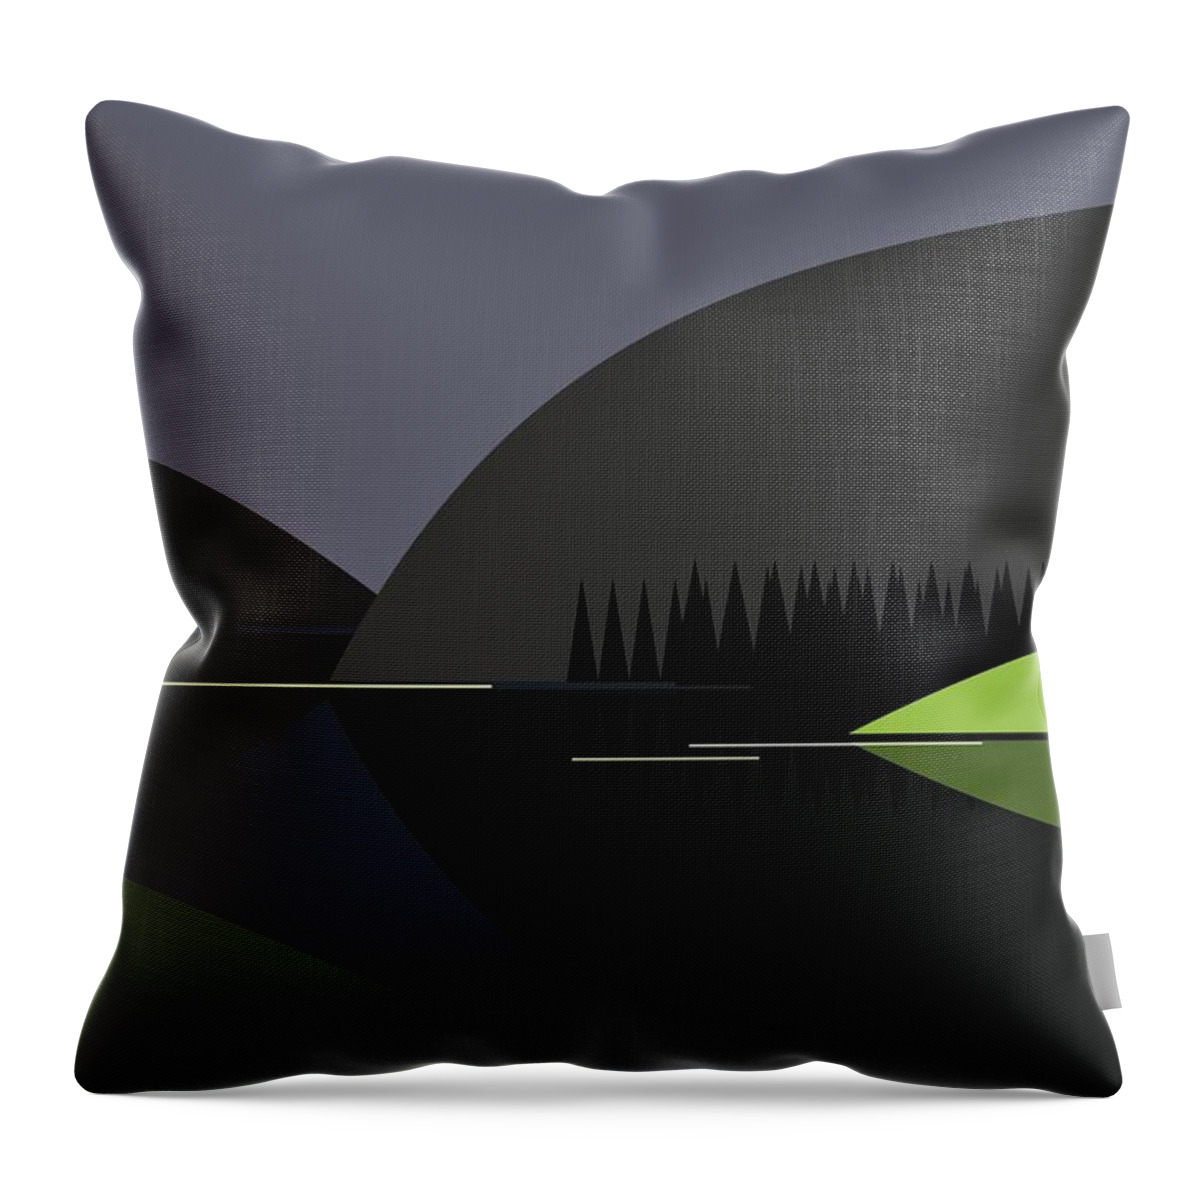 Sunshine Throw Pillow featuring the digital art Here comes the sun. by Fatline Graphic Art